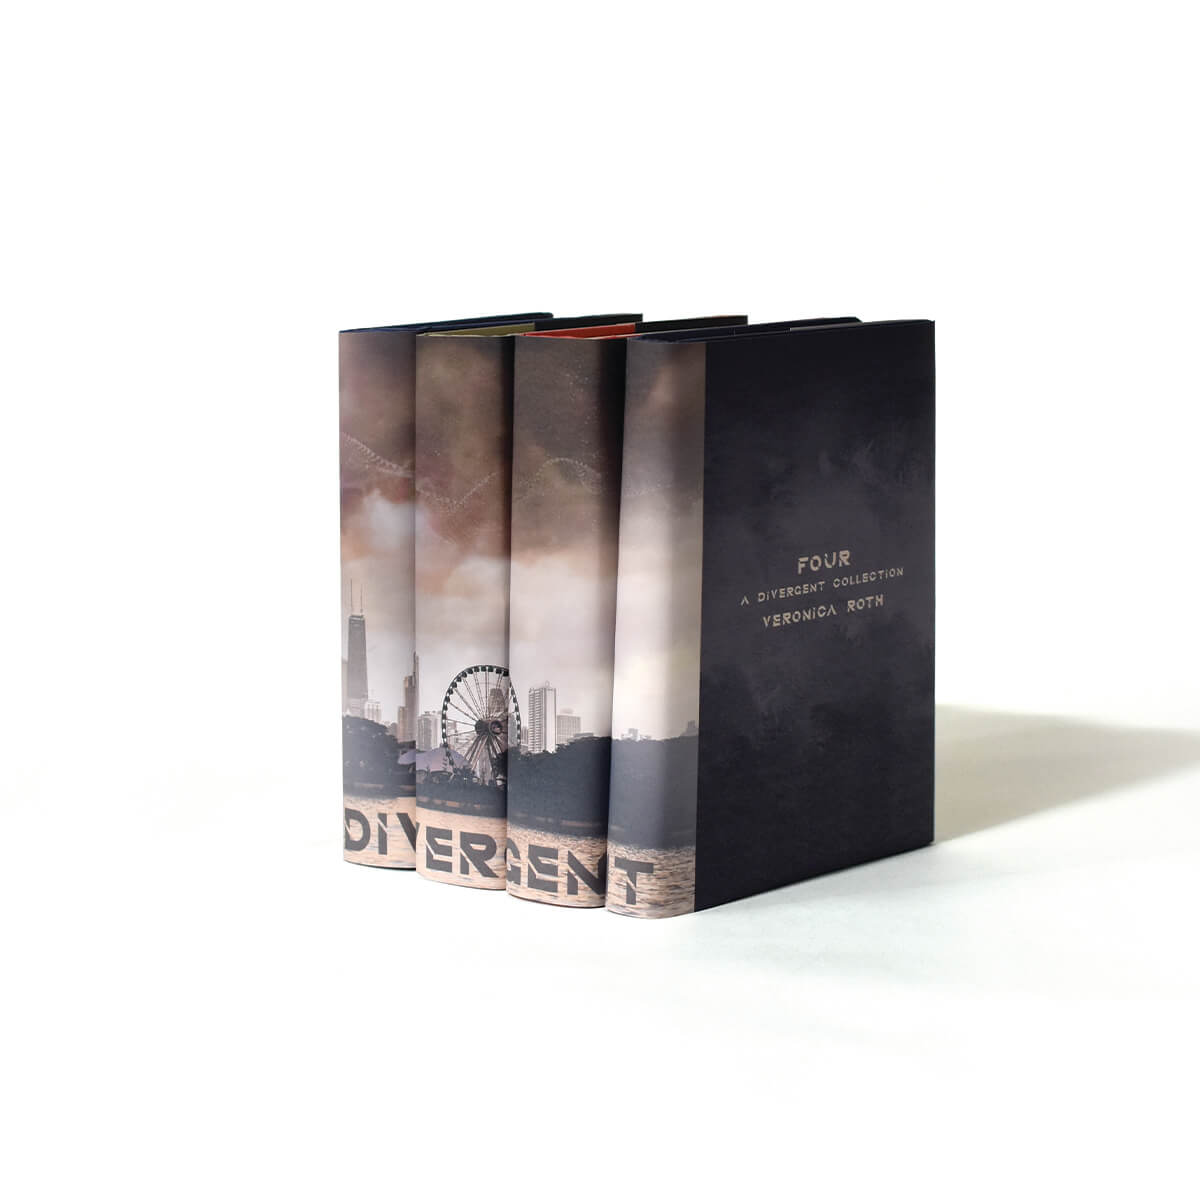 Experience the post-apocalyptic Divergent series with our made-to-order book set. Featuring hardcovers published by HarperCollins in custom-printed jackets, this is the perfect way to explore Veronica Roth's universe.